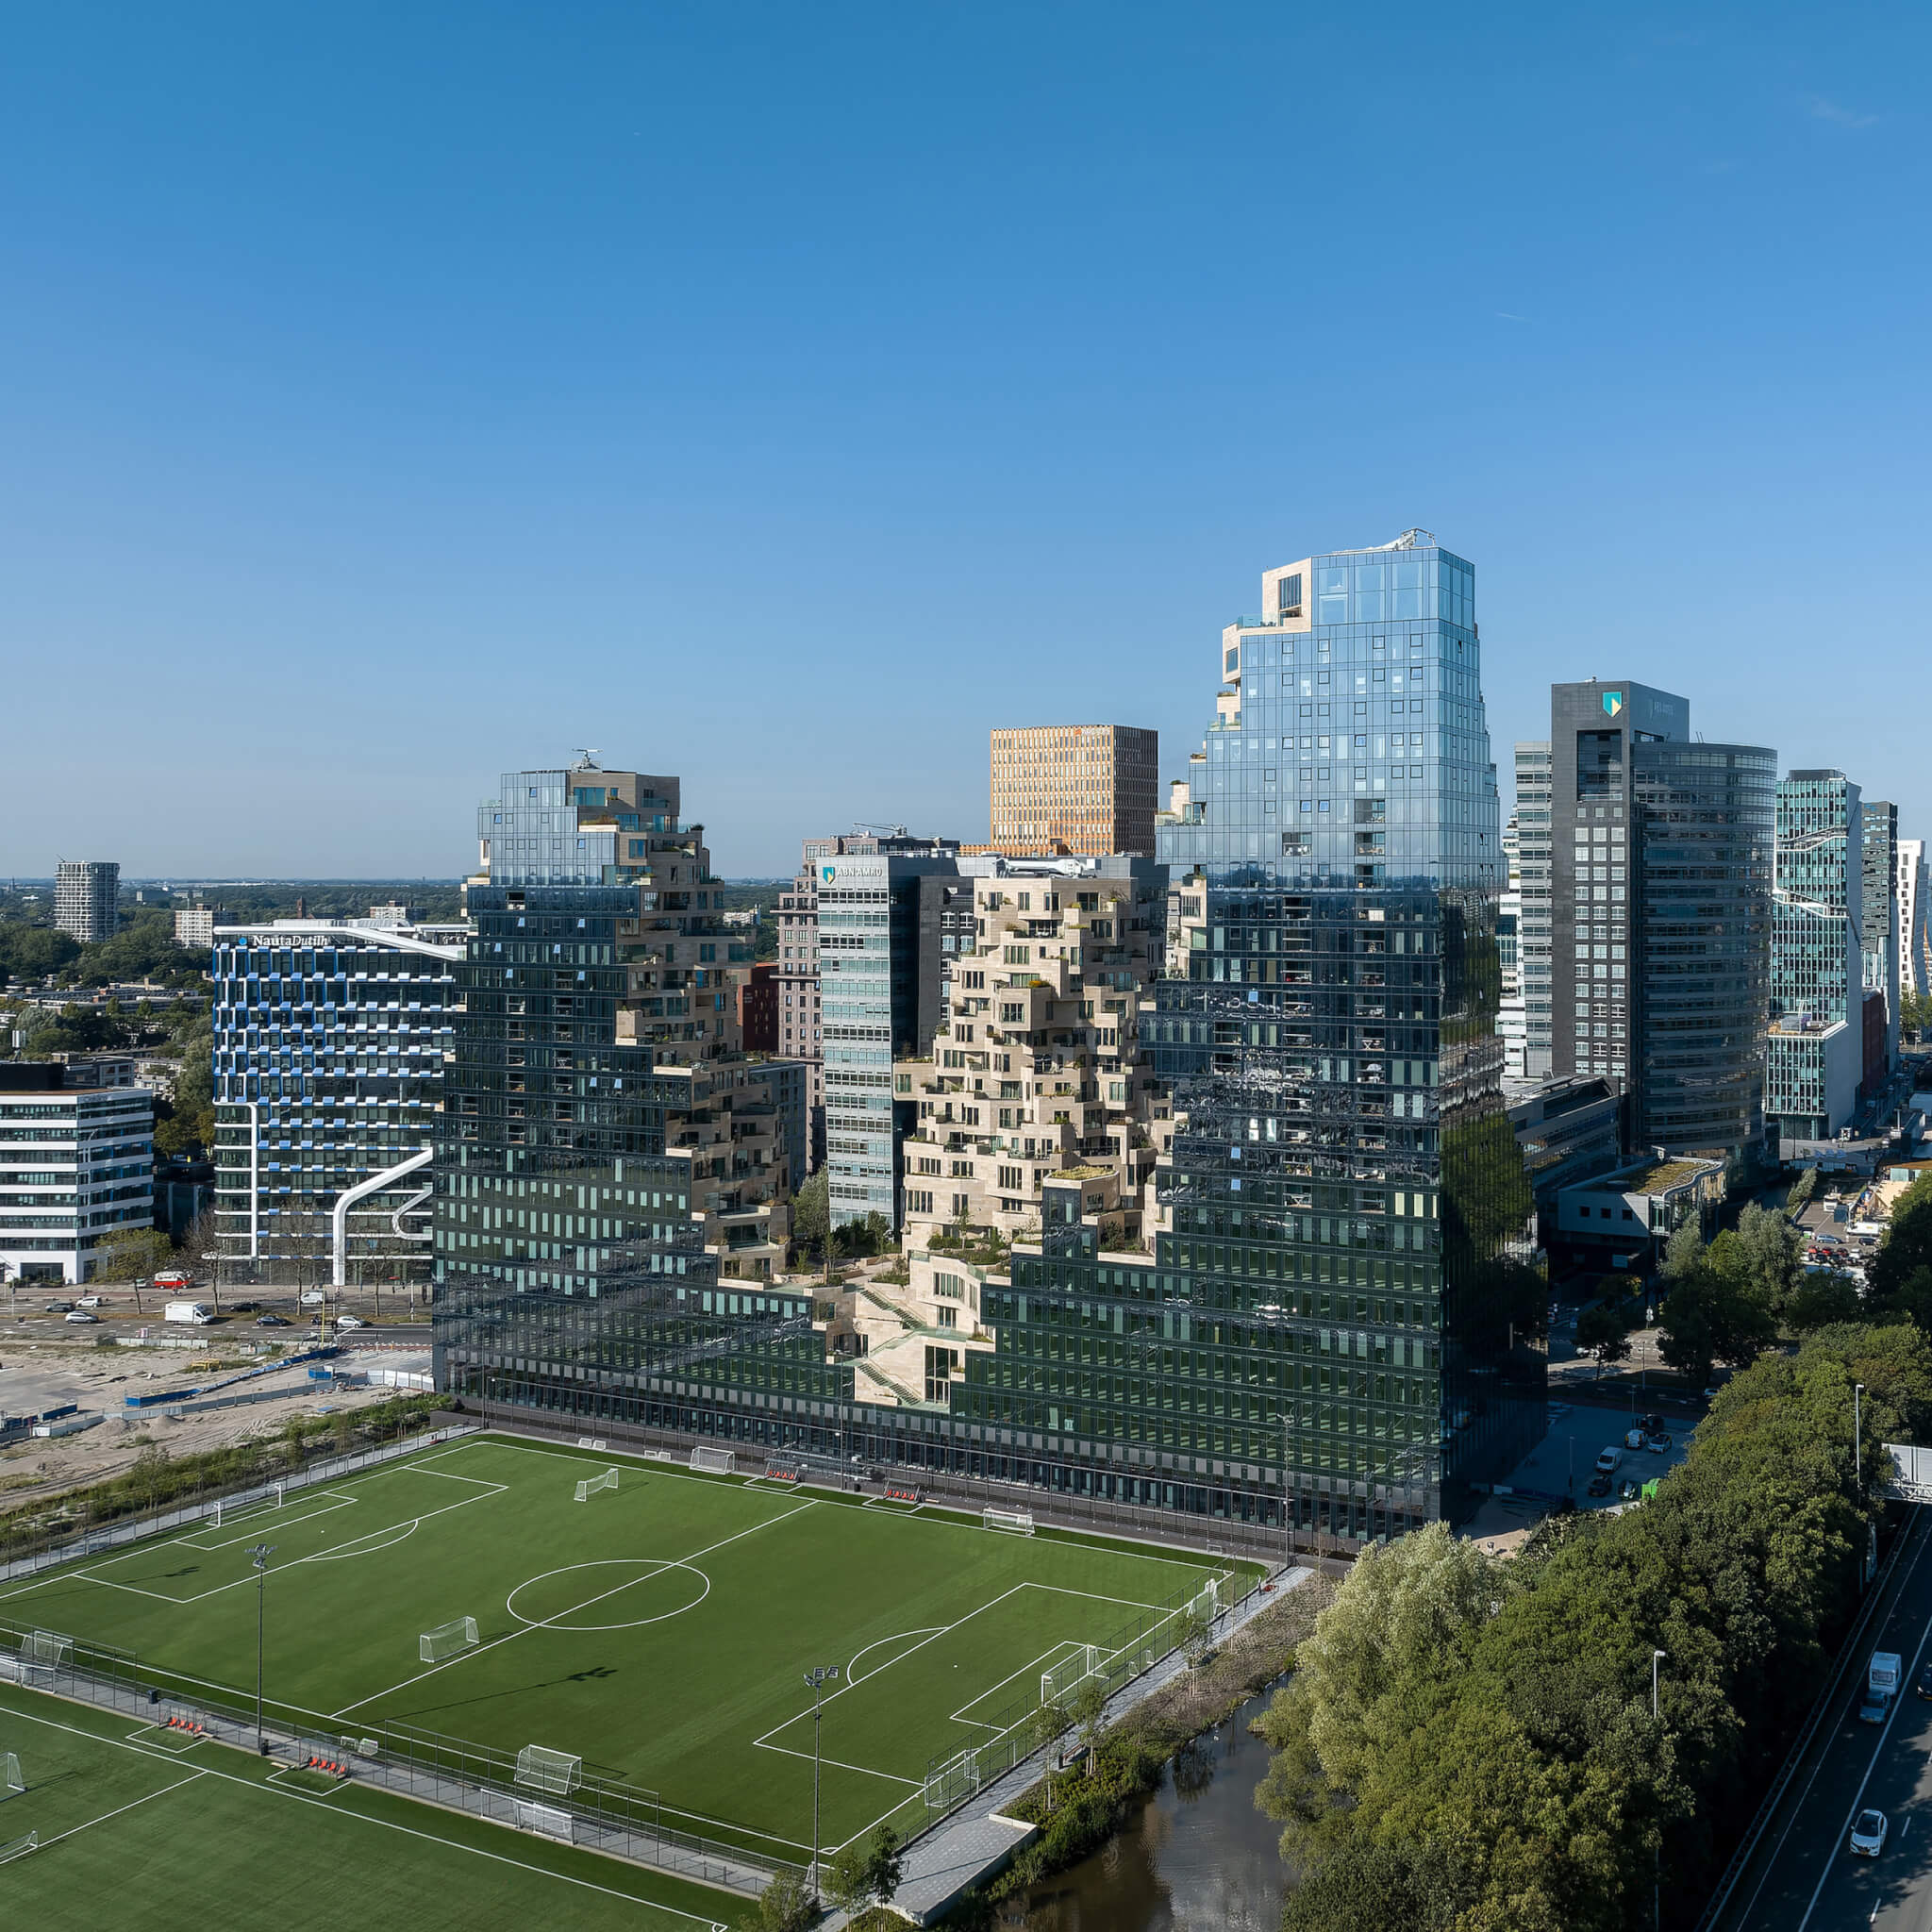 jagged towers clad in reflective glass rising over a football pitch